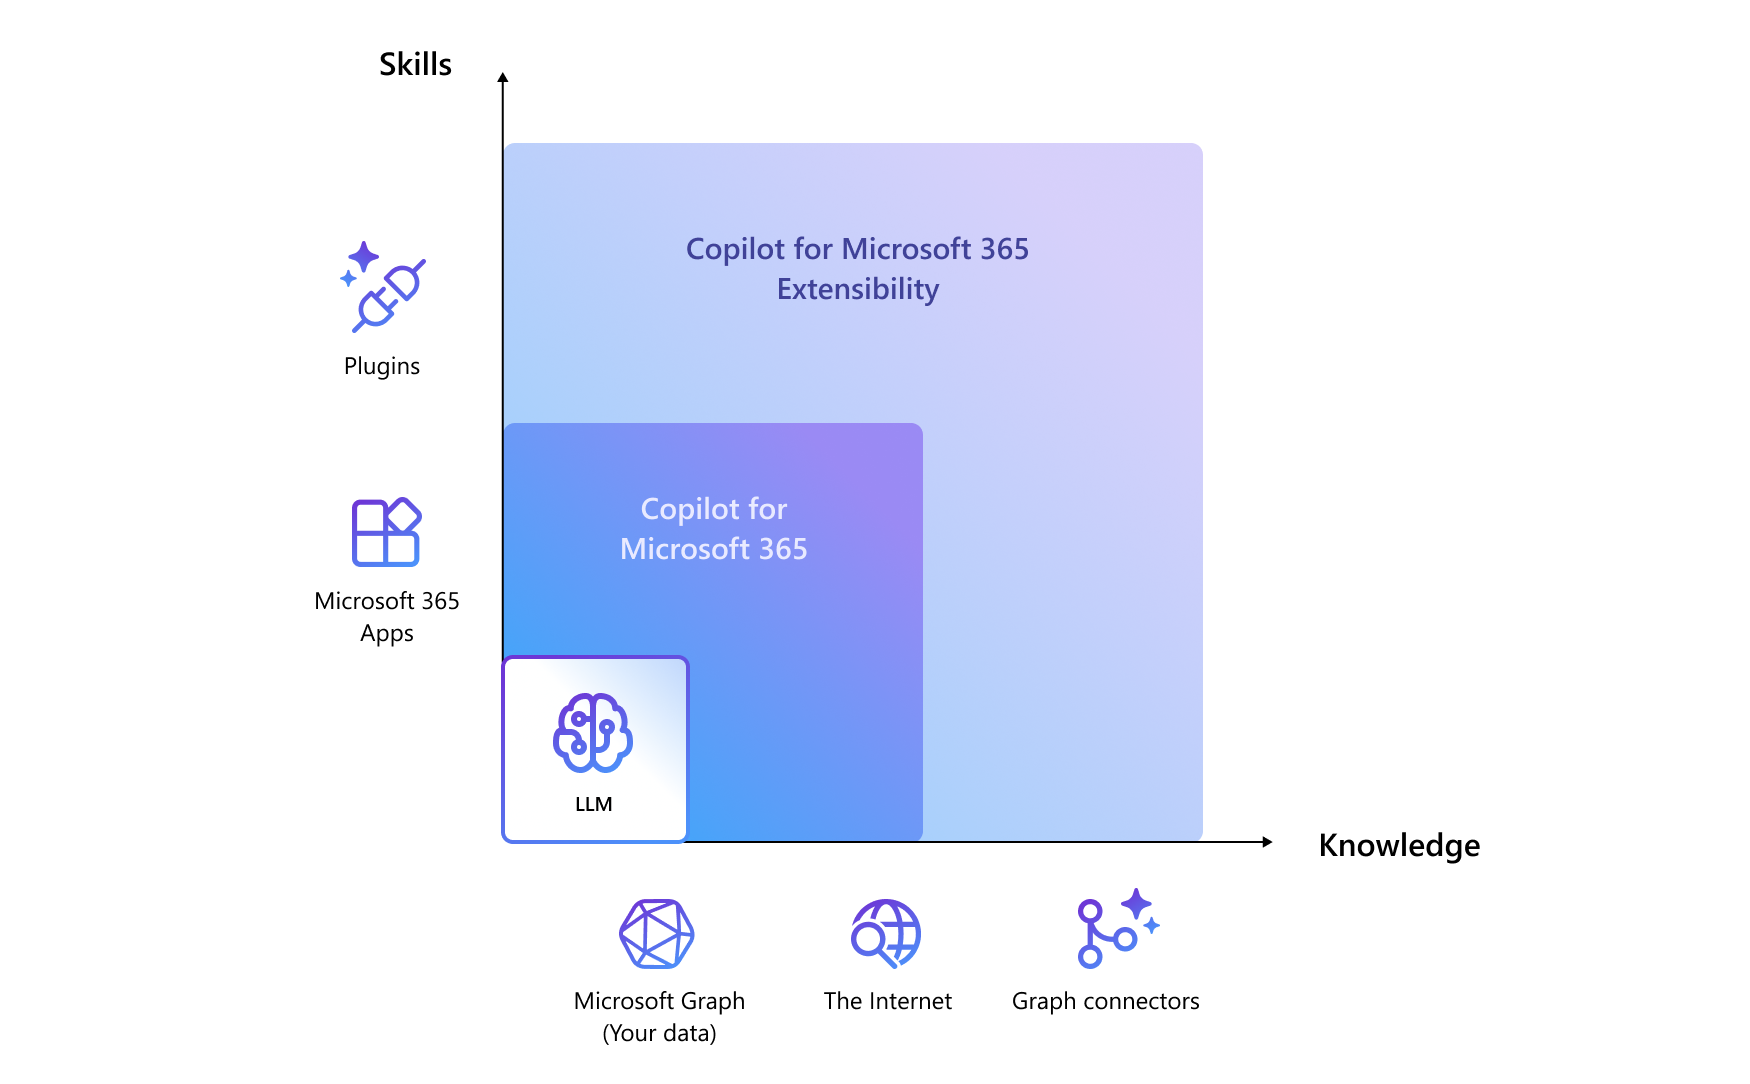 Chart with organizational 'Knowledge' as the x-axis and user 'Skills' as the y-axis showing that you can extend Copilot skills with plugins and extend Copilot knowledge with Graph connectors